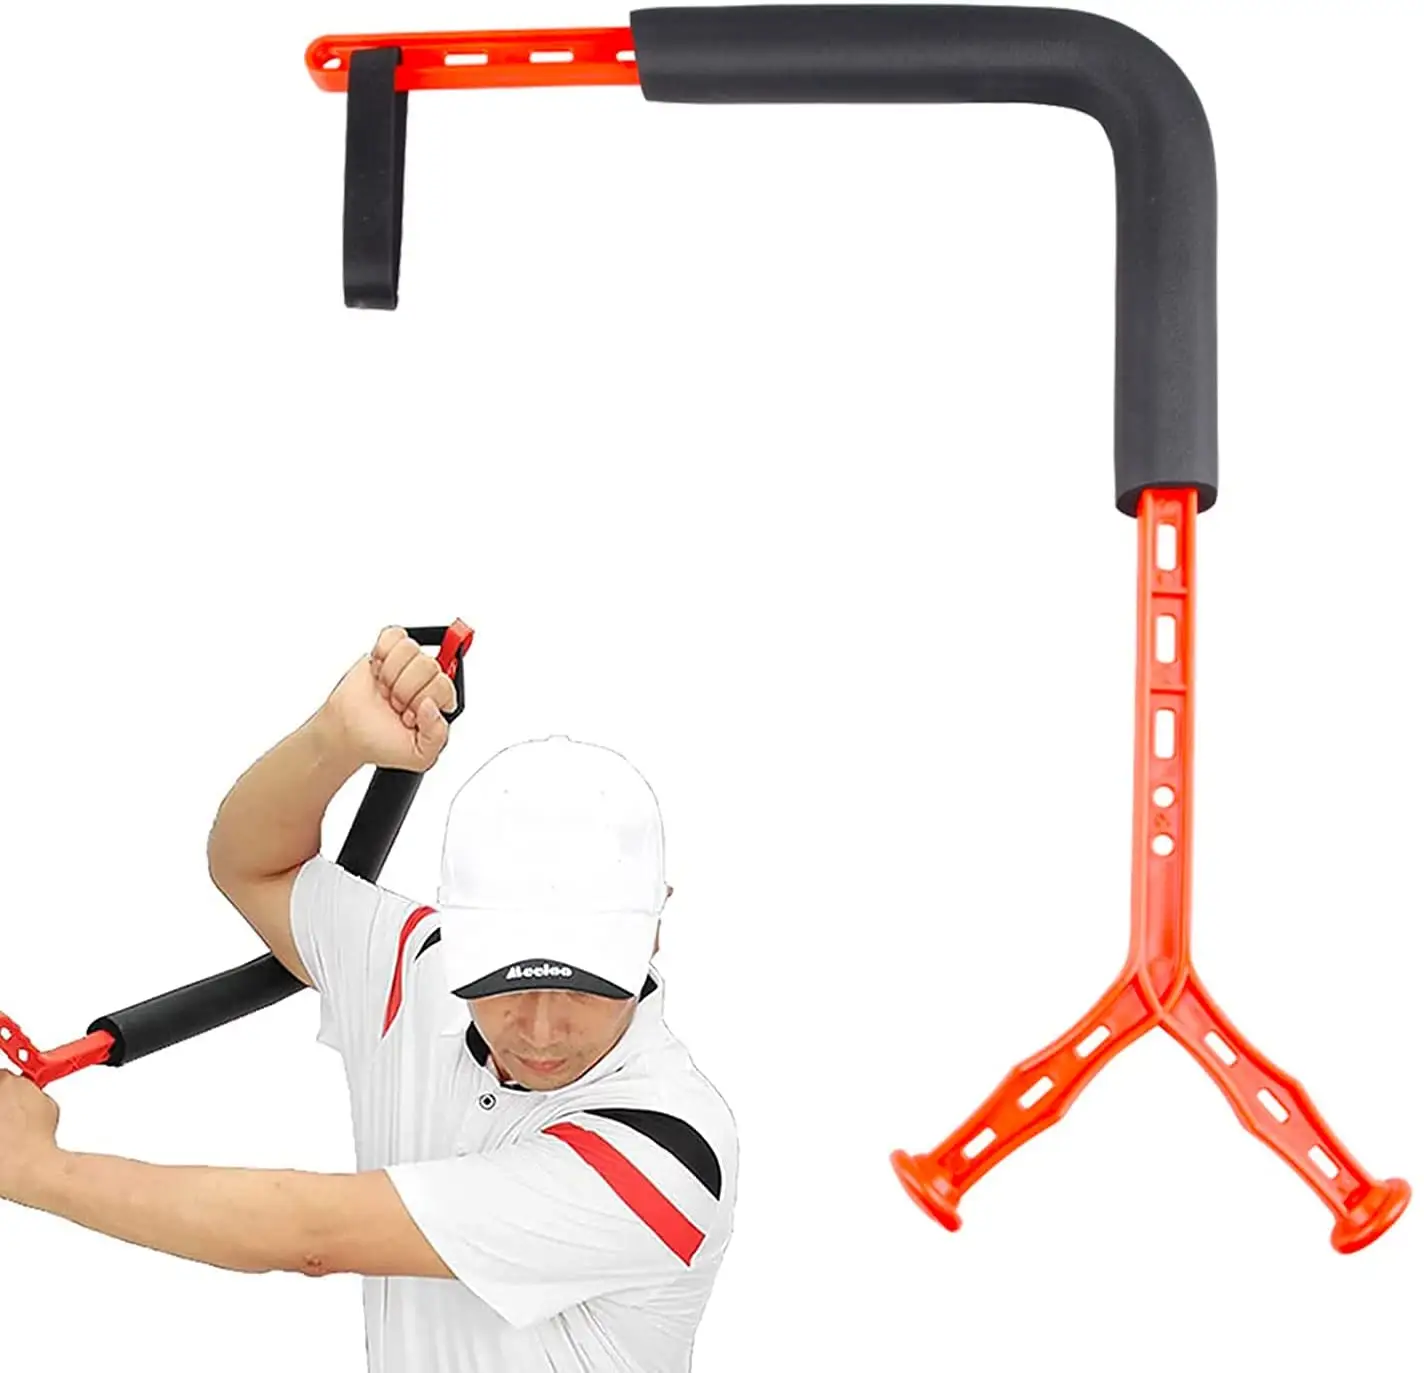 Hot Selling Effective Training Aid Golf Swing Trainer Golf Rotator Posture Corrector Warm-up exerciser for Golf Beginner